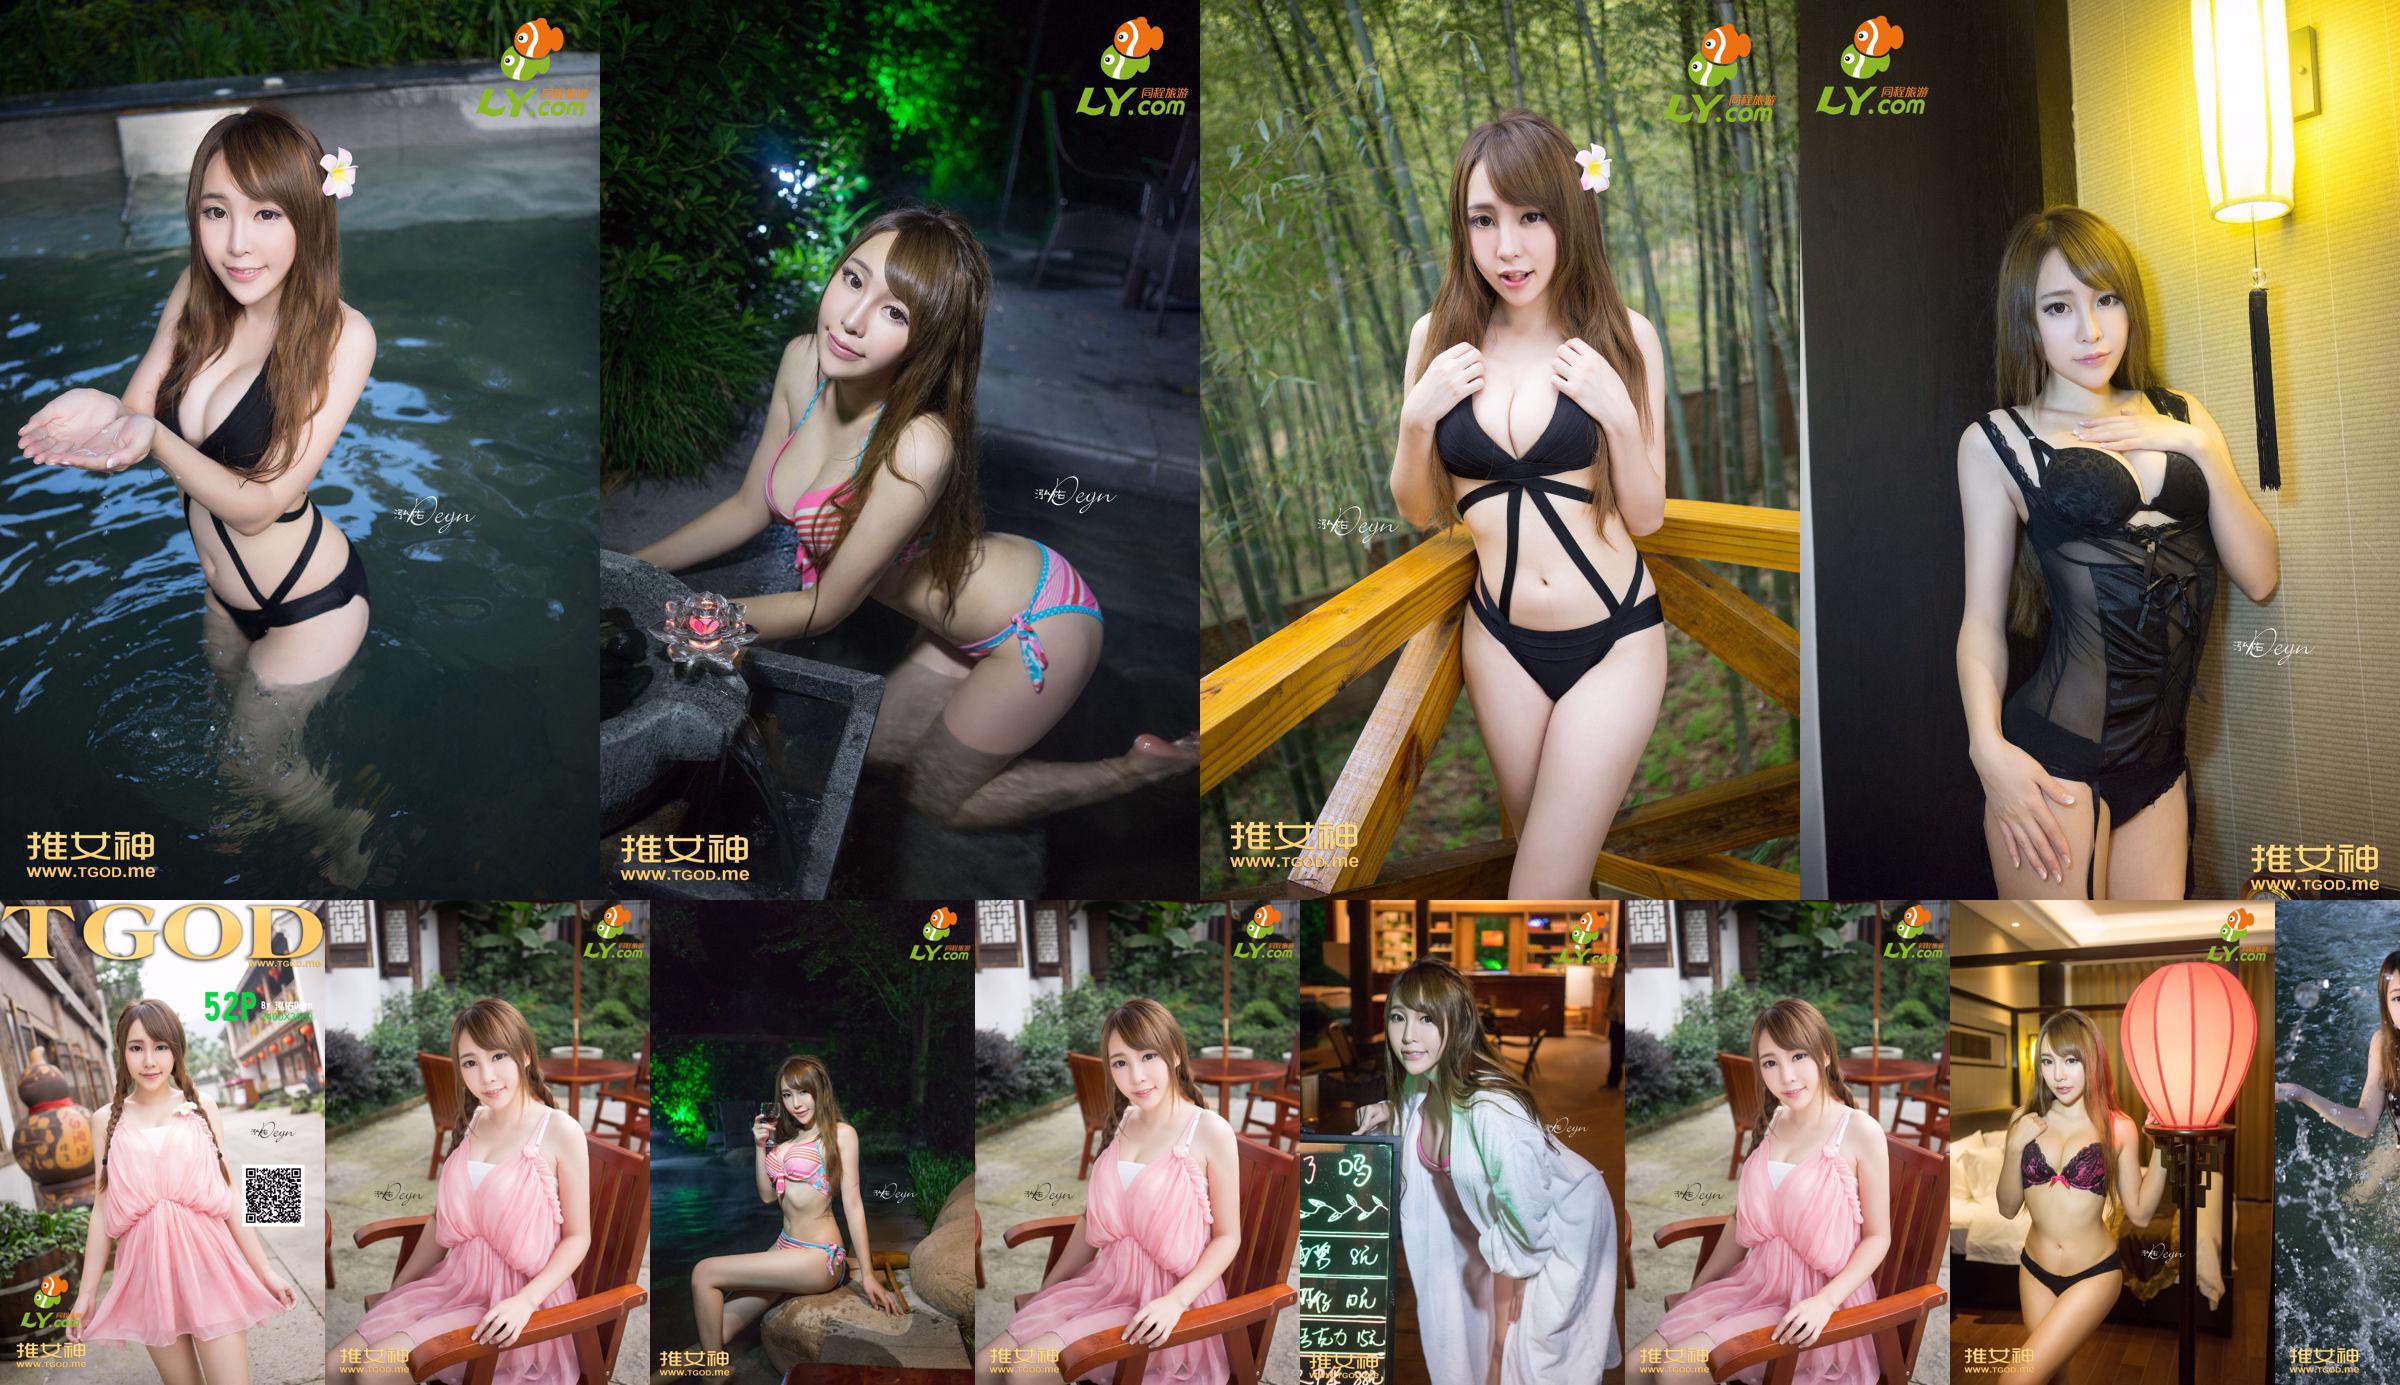 Huang Mengxian "Where Is the Goddess Going Issue 7" [TGOD Push Goddess] No.709e9c Pagina 1